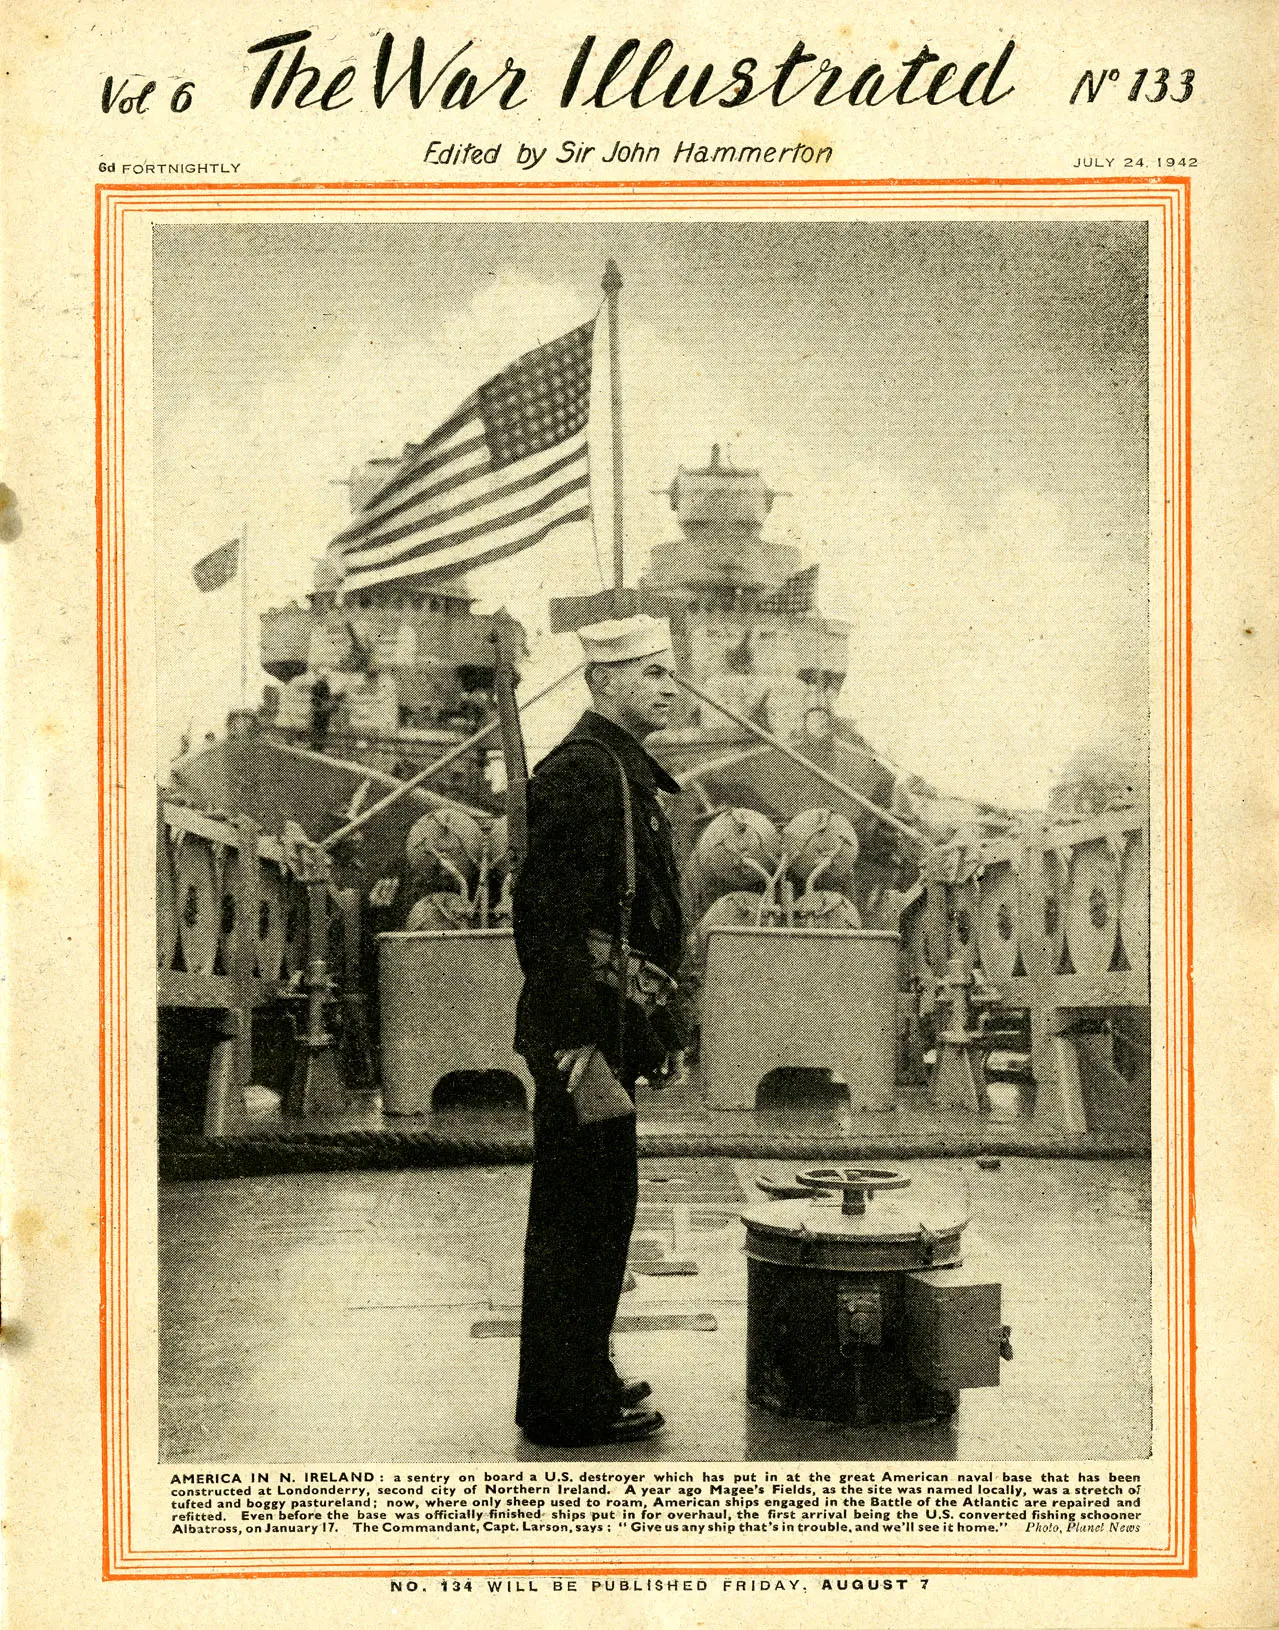 The front page of the British magazine "THE WAR ILLUSTRATED" published, July 24, 1942. The page is taken up by a photograph of an American sailor standing on the deck of a destroyer with a rifle over his shoulder, an American flag waving behind him, and two larger American ships looming close behind.